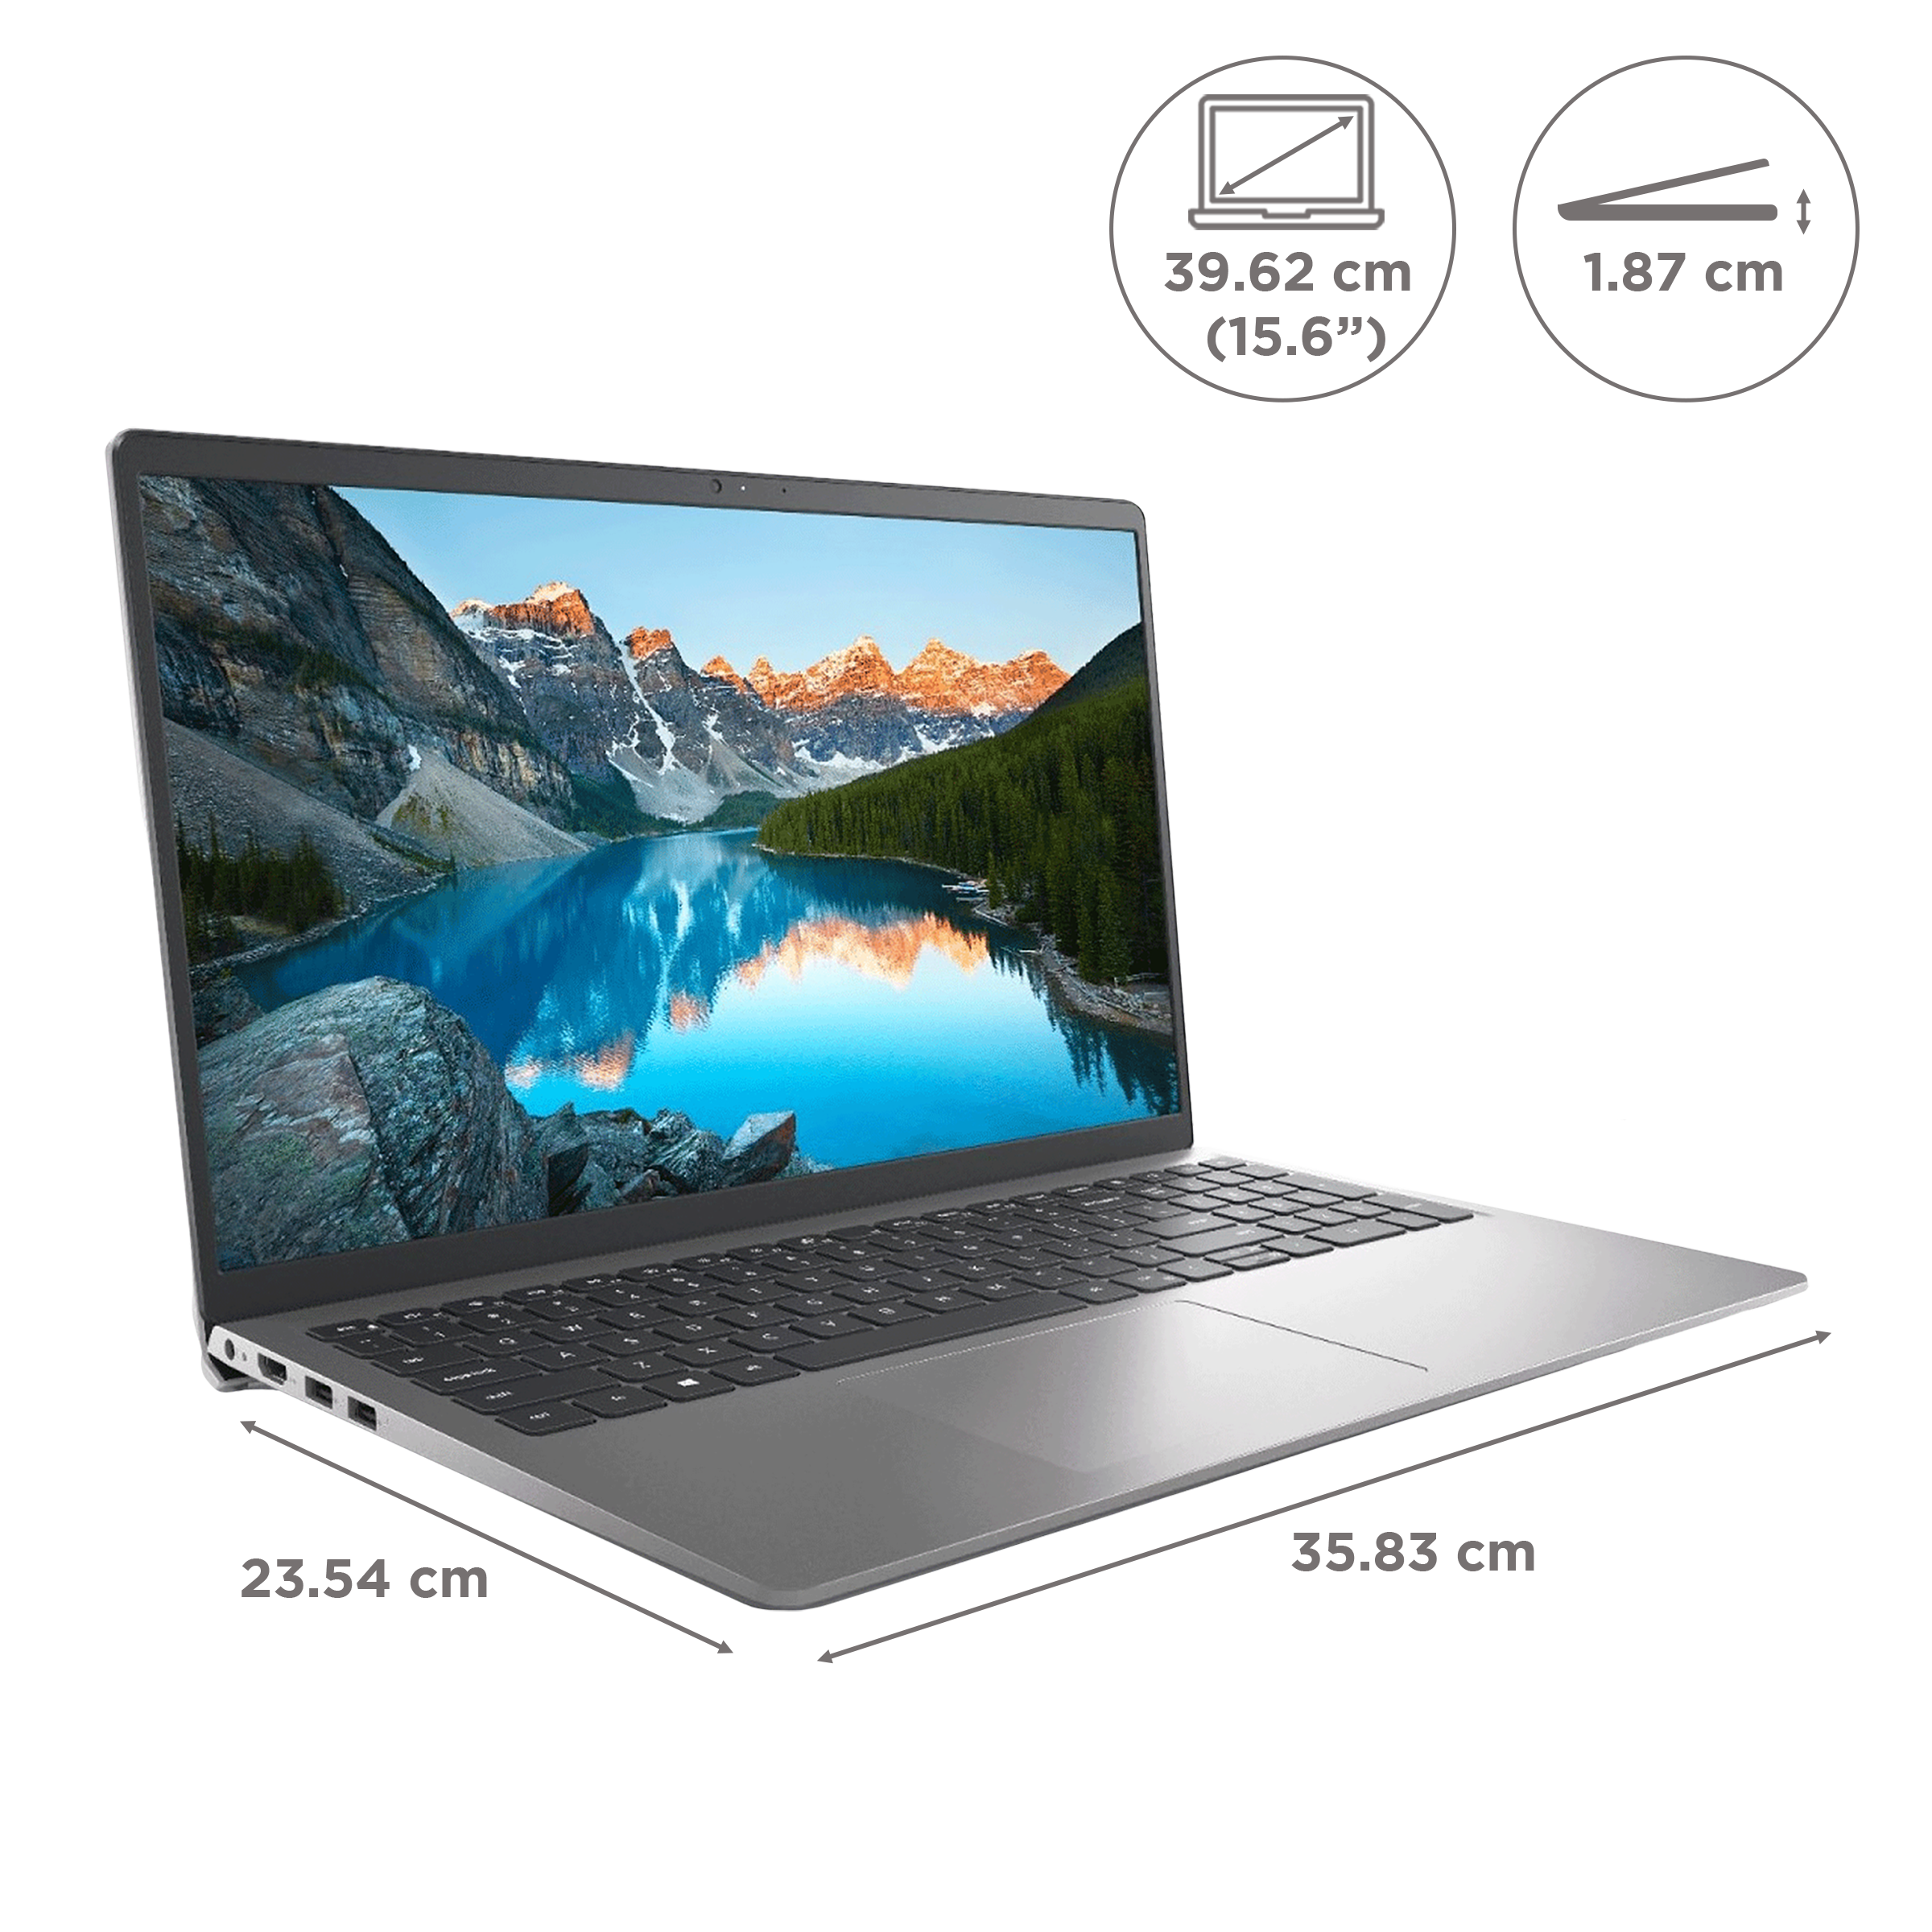 Dell Inspiron 3511 Intel Core i5 11th Gen (15.6 inch, 8GB, 1TB and 256GB, Windows 11, MS Office 2021, NVIDIA GeForce MX350 Graphics, FHD IPS Display, Platinum Silver, D560674WIN9S)_2